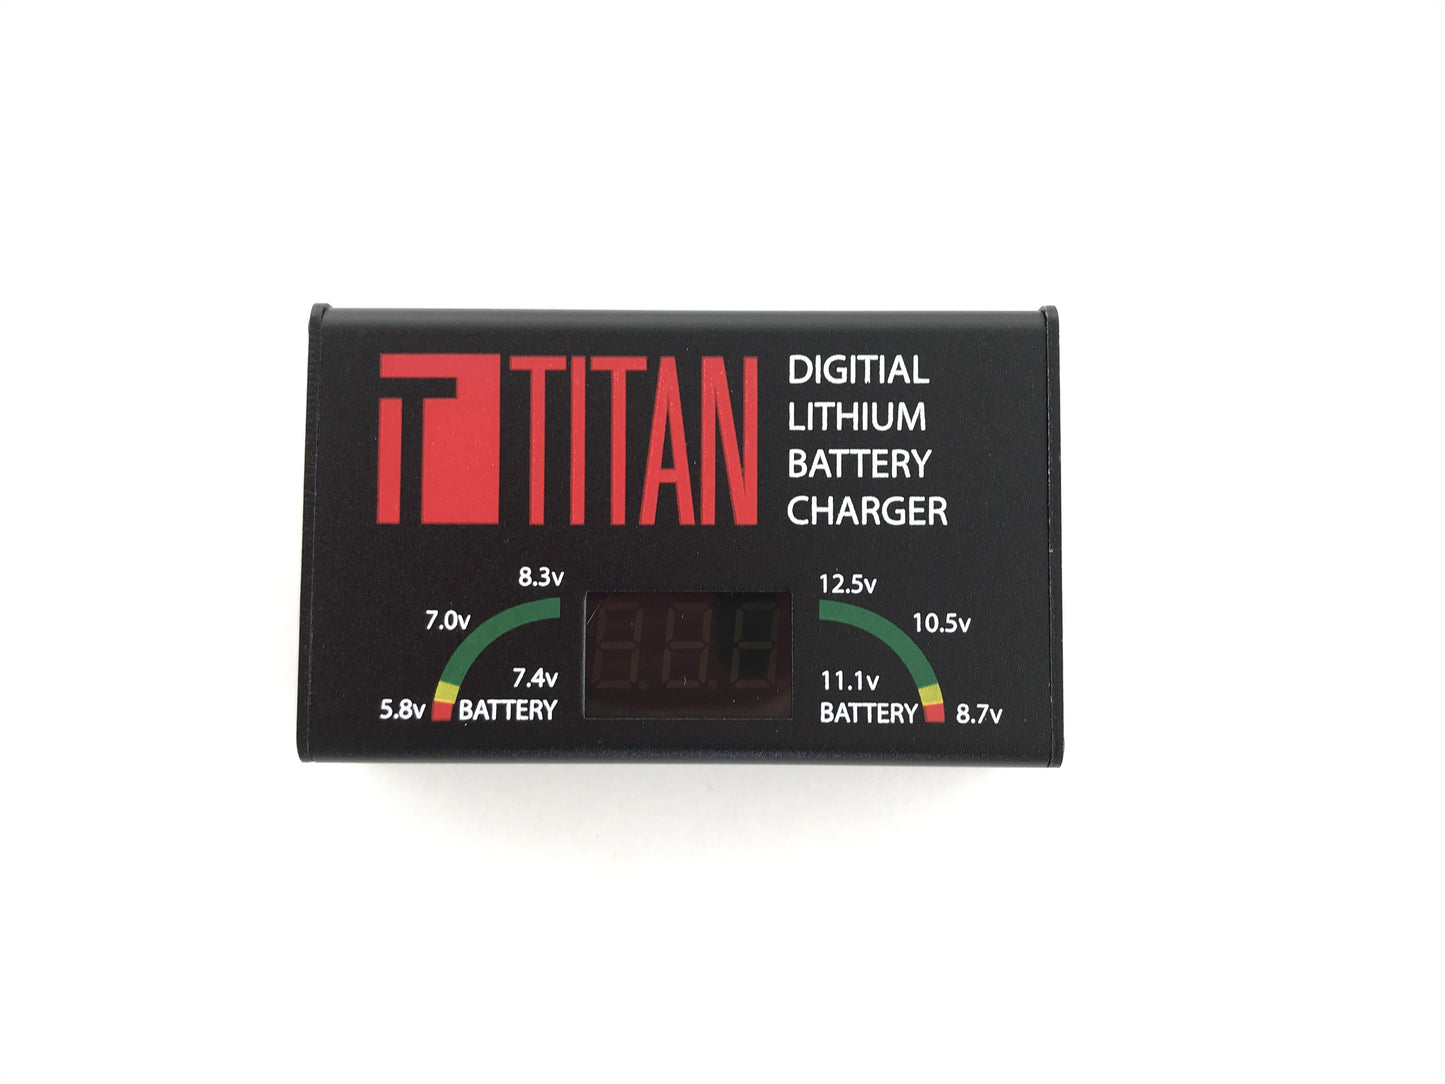 Titan Digital Charger- Gel Blaster Parts & Accessories For Sale - Sting Ops Tactical